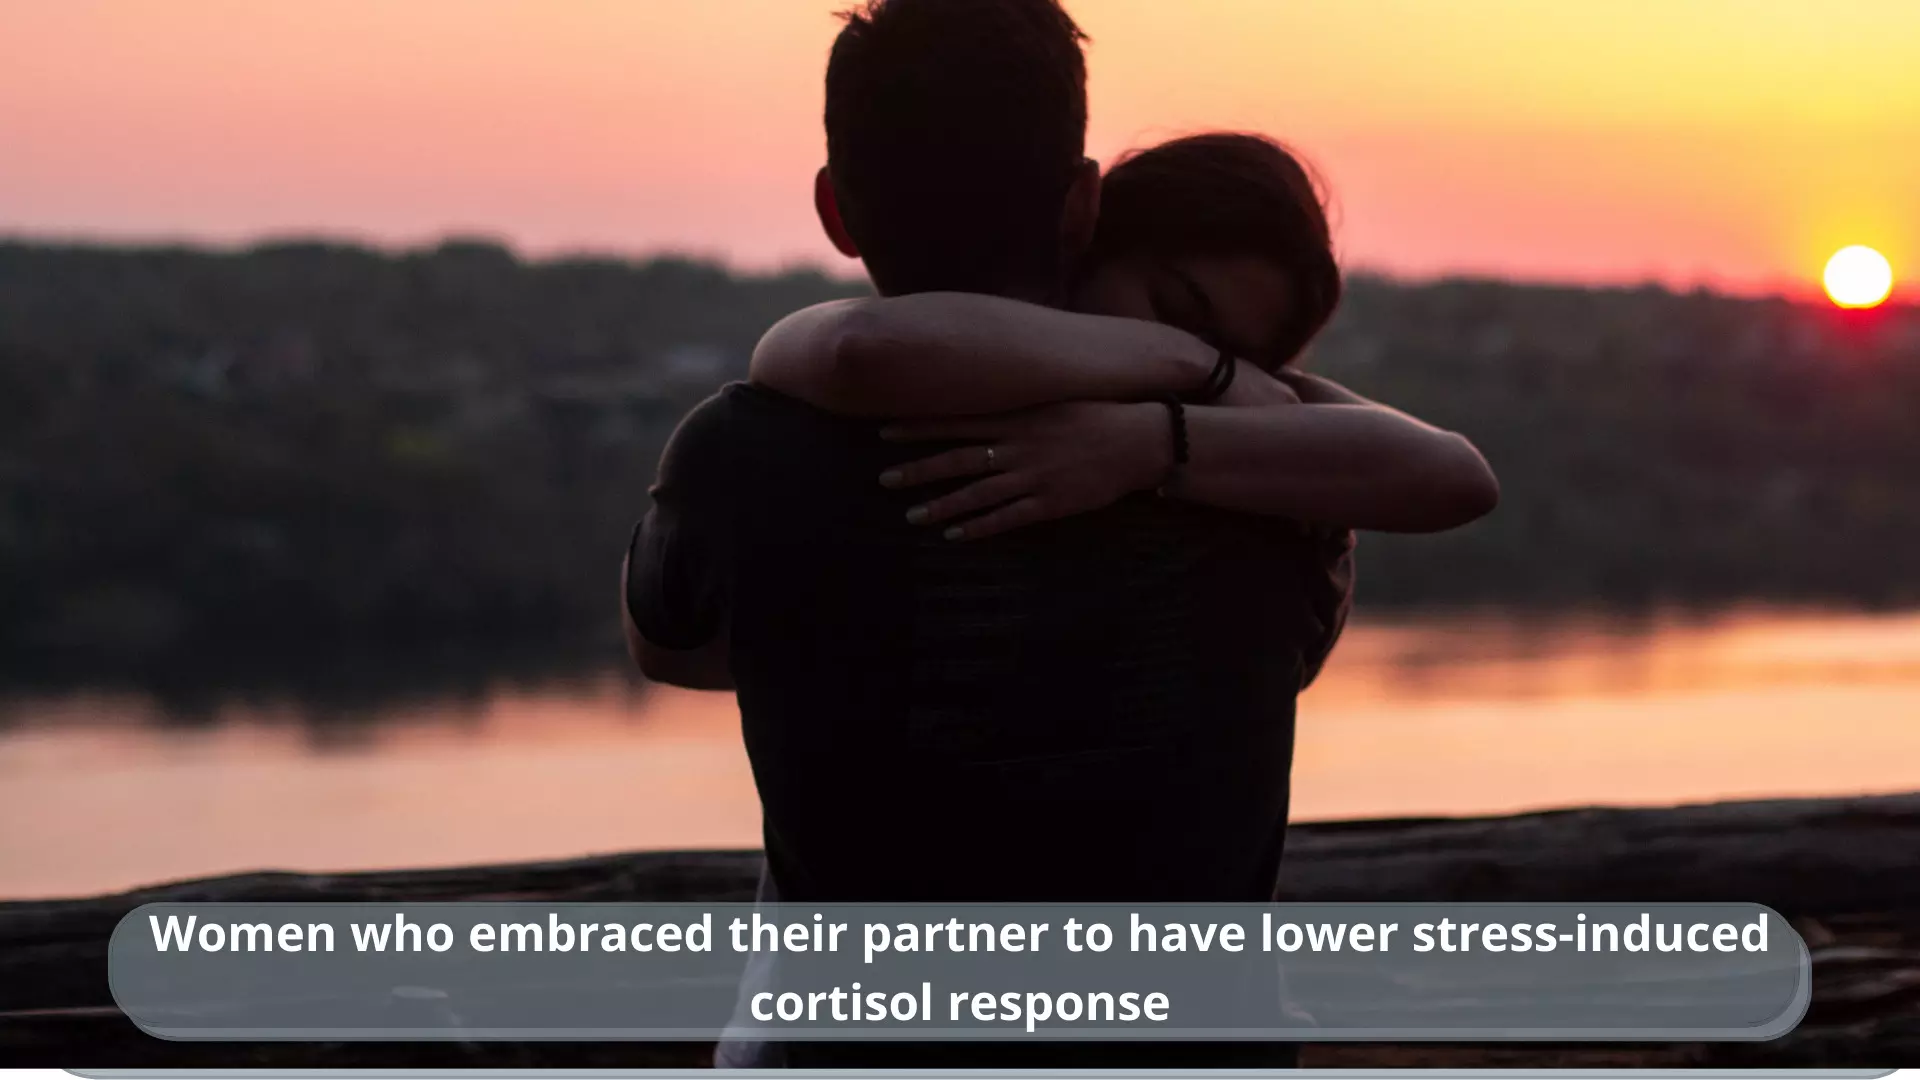 Women who embraced their partner to have lower stress-induced cortisol response